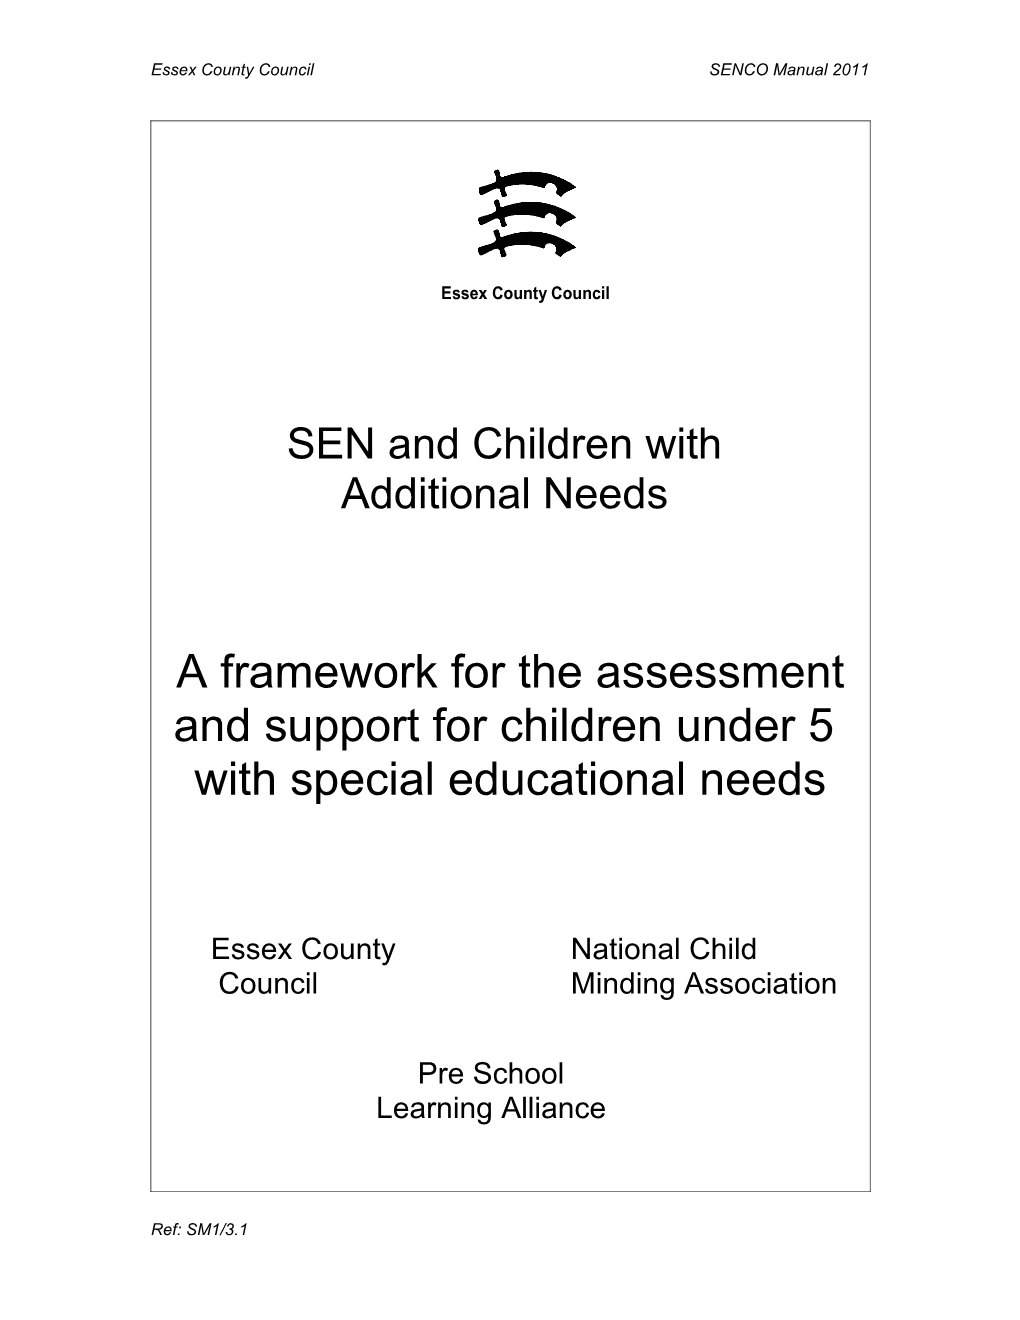 A Framework for the Assessment and Support for Children Under 5